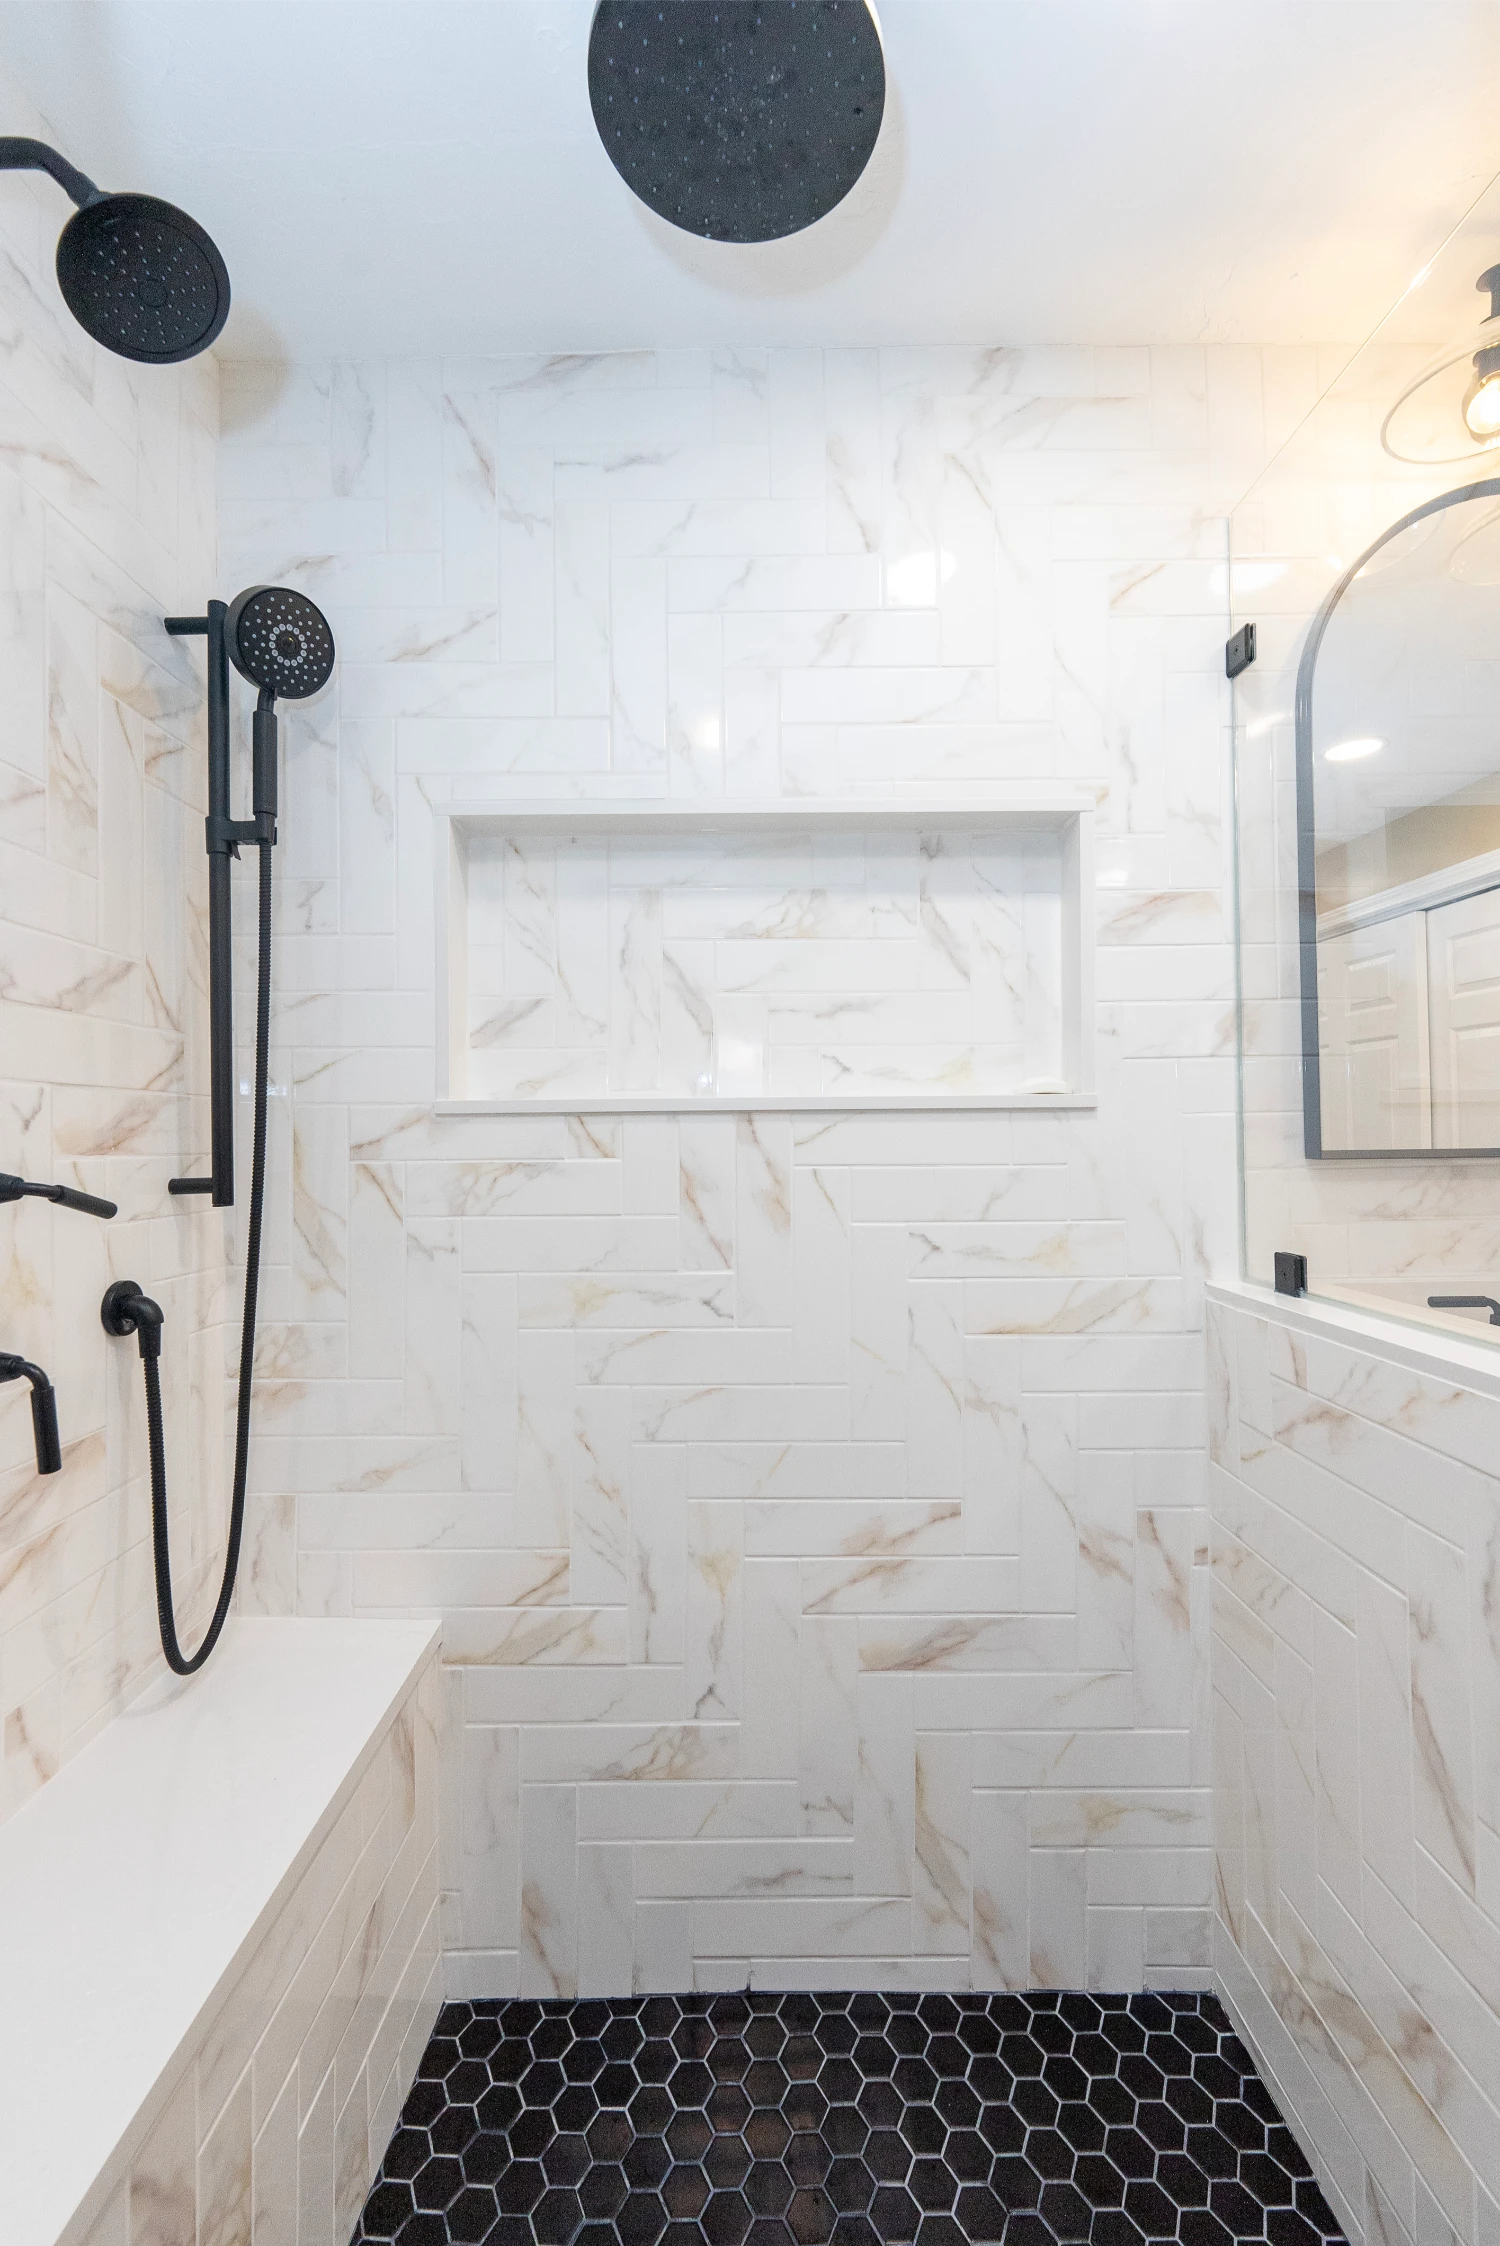 custom remodeled stand up shower with harringbone tile pattern